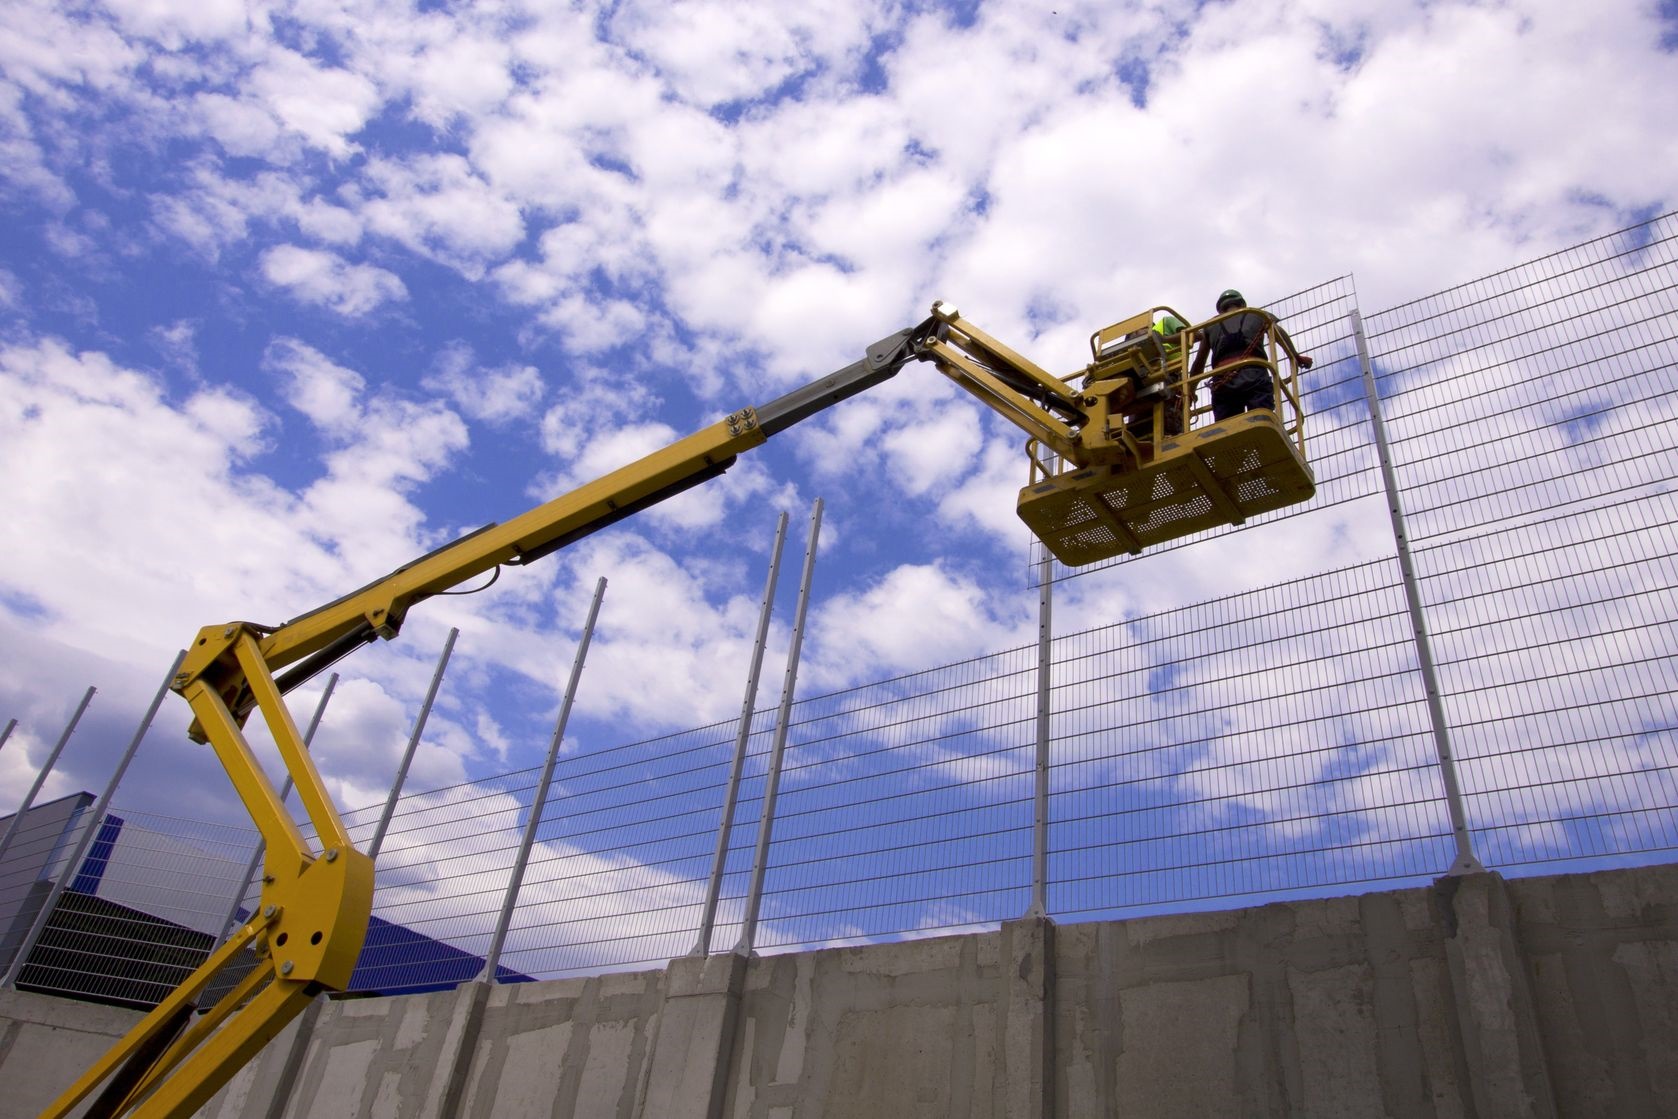 Image shows Cherry Picker vehicle with workers.